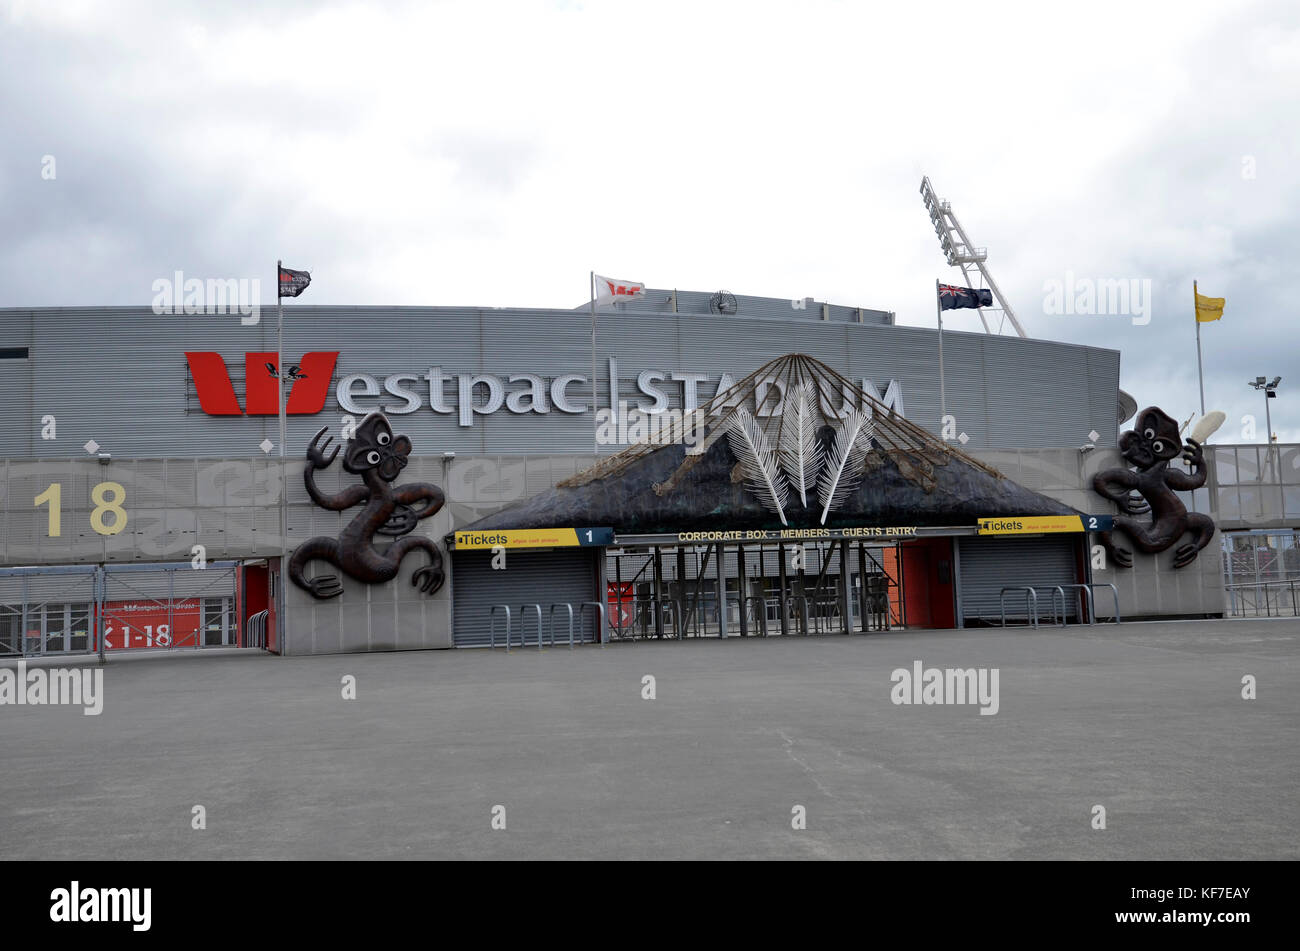 Westpac Rugby and Sports stadium, affectionately known as the Cake Tin in Wellington, New Zealand Stock Photo